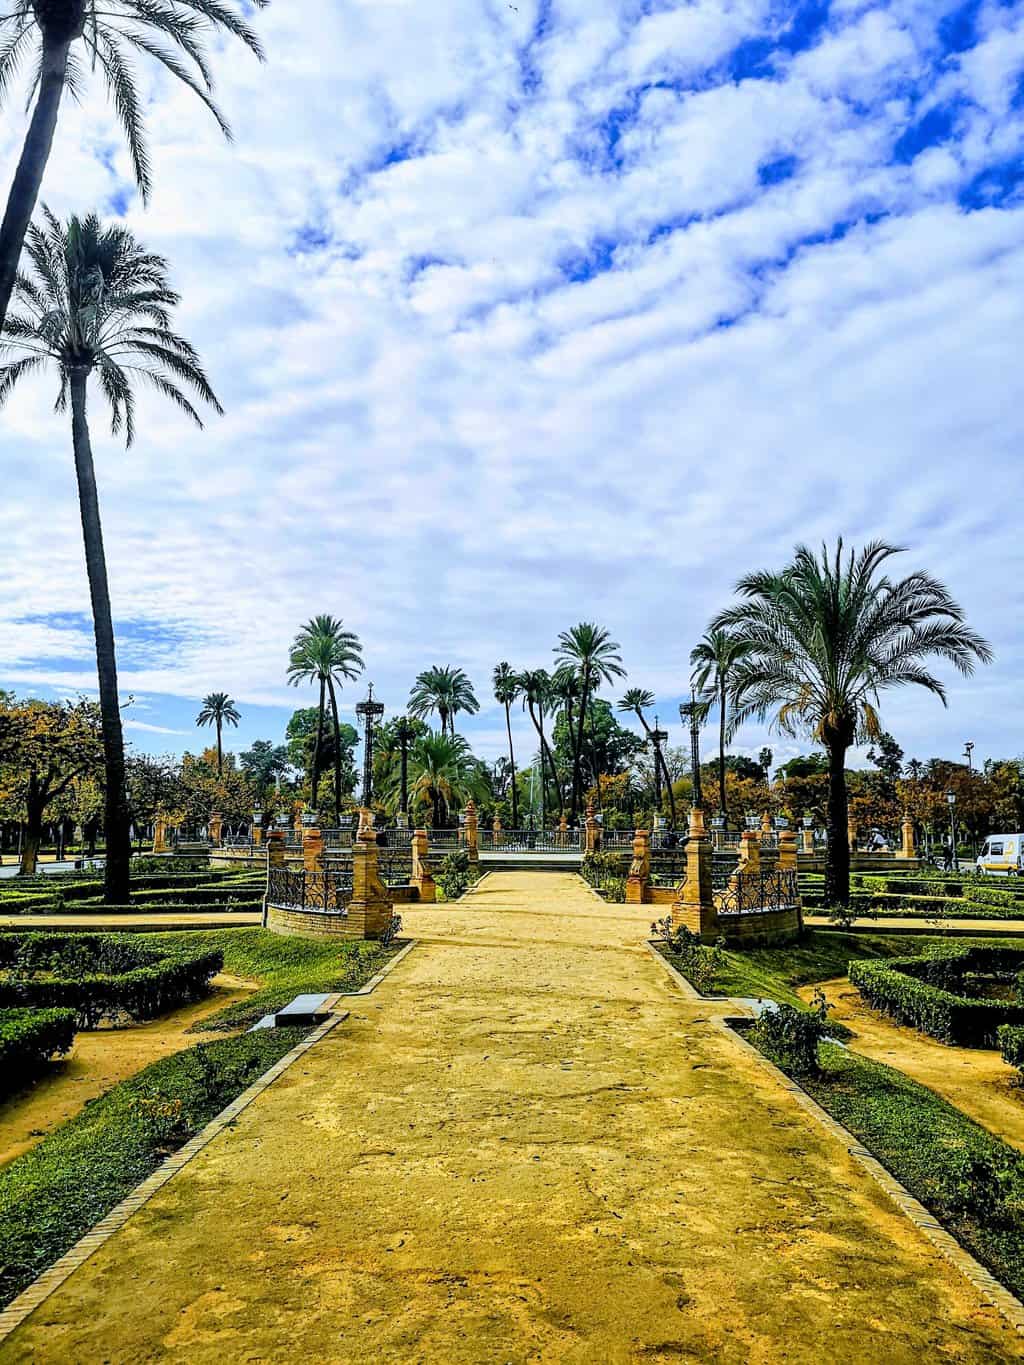 A wide sandy path is lined by thin, tall palm trees and landscaped gardens in Seville's Maria Luisa Park